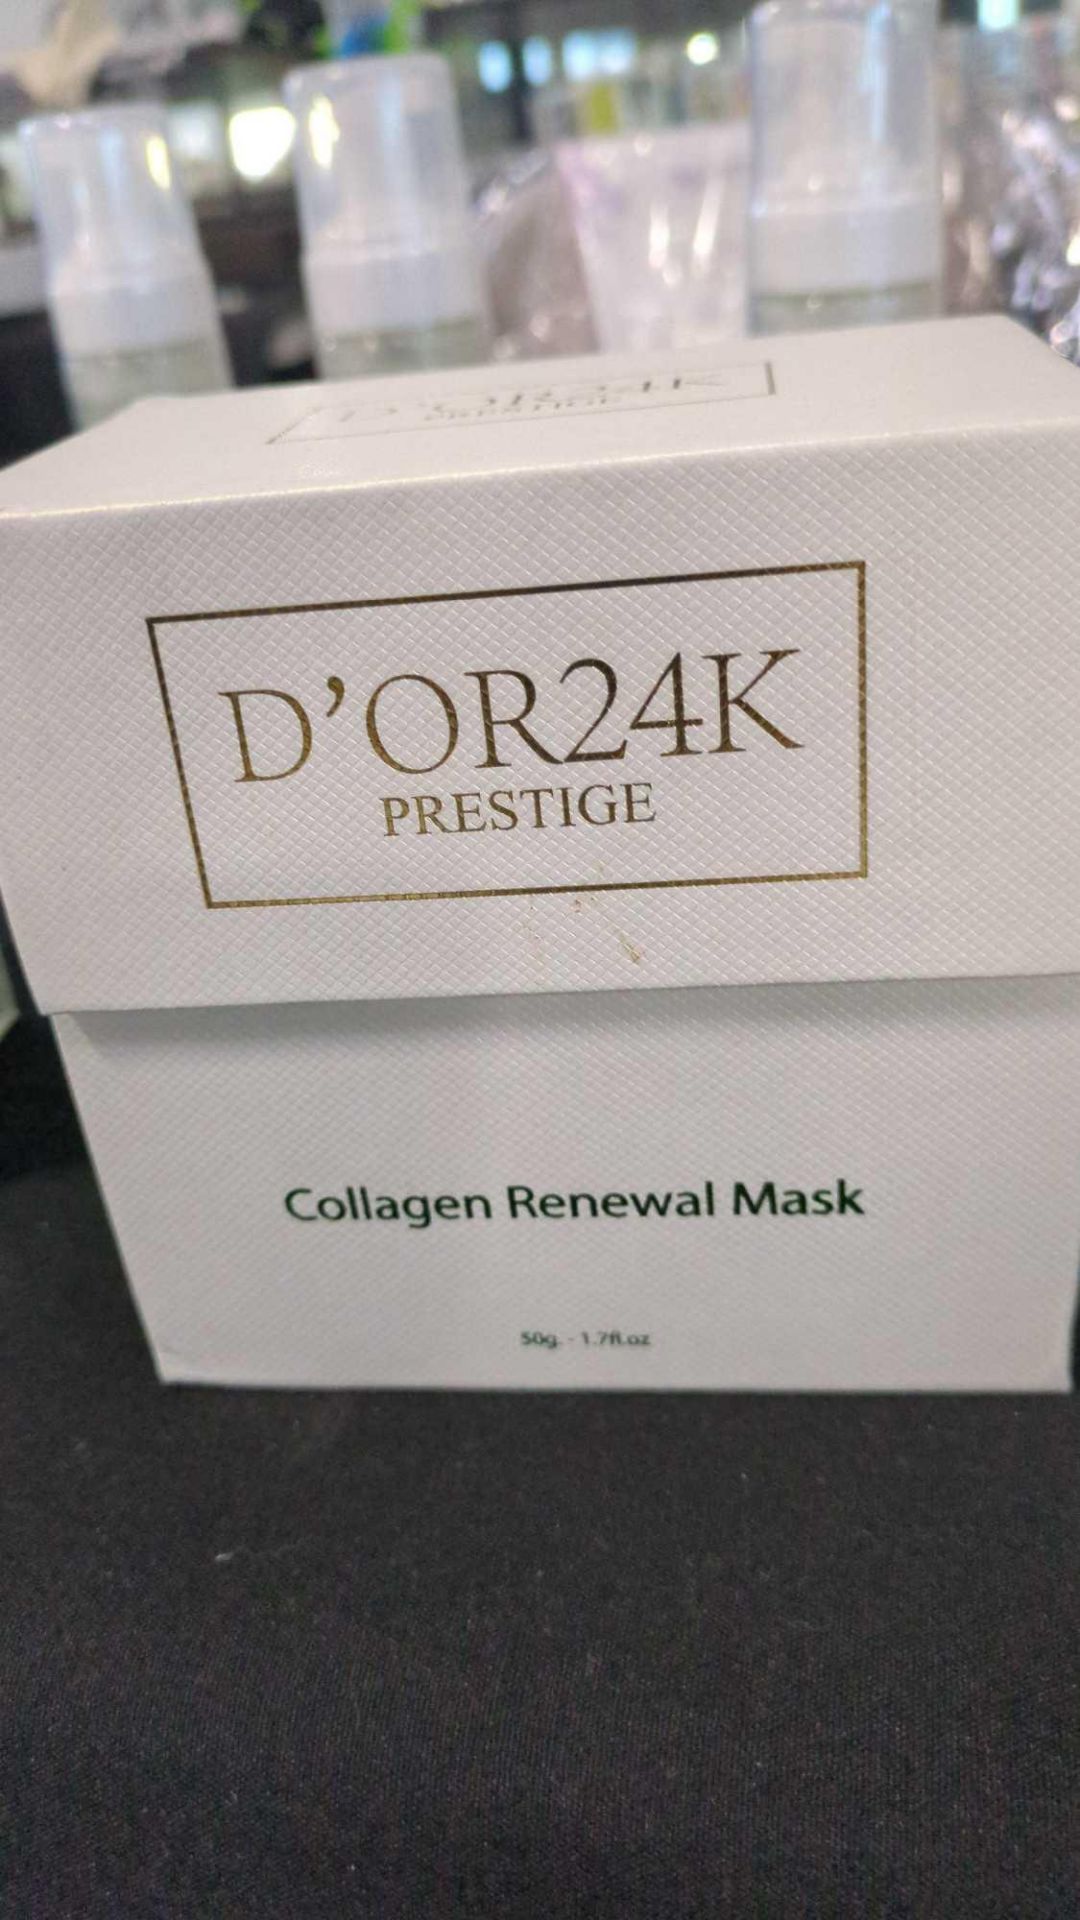 D'or 24K prestige products, opatra products dermolactives thermal X and more - Image 11 of 22